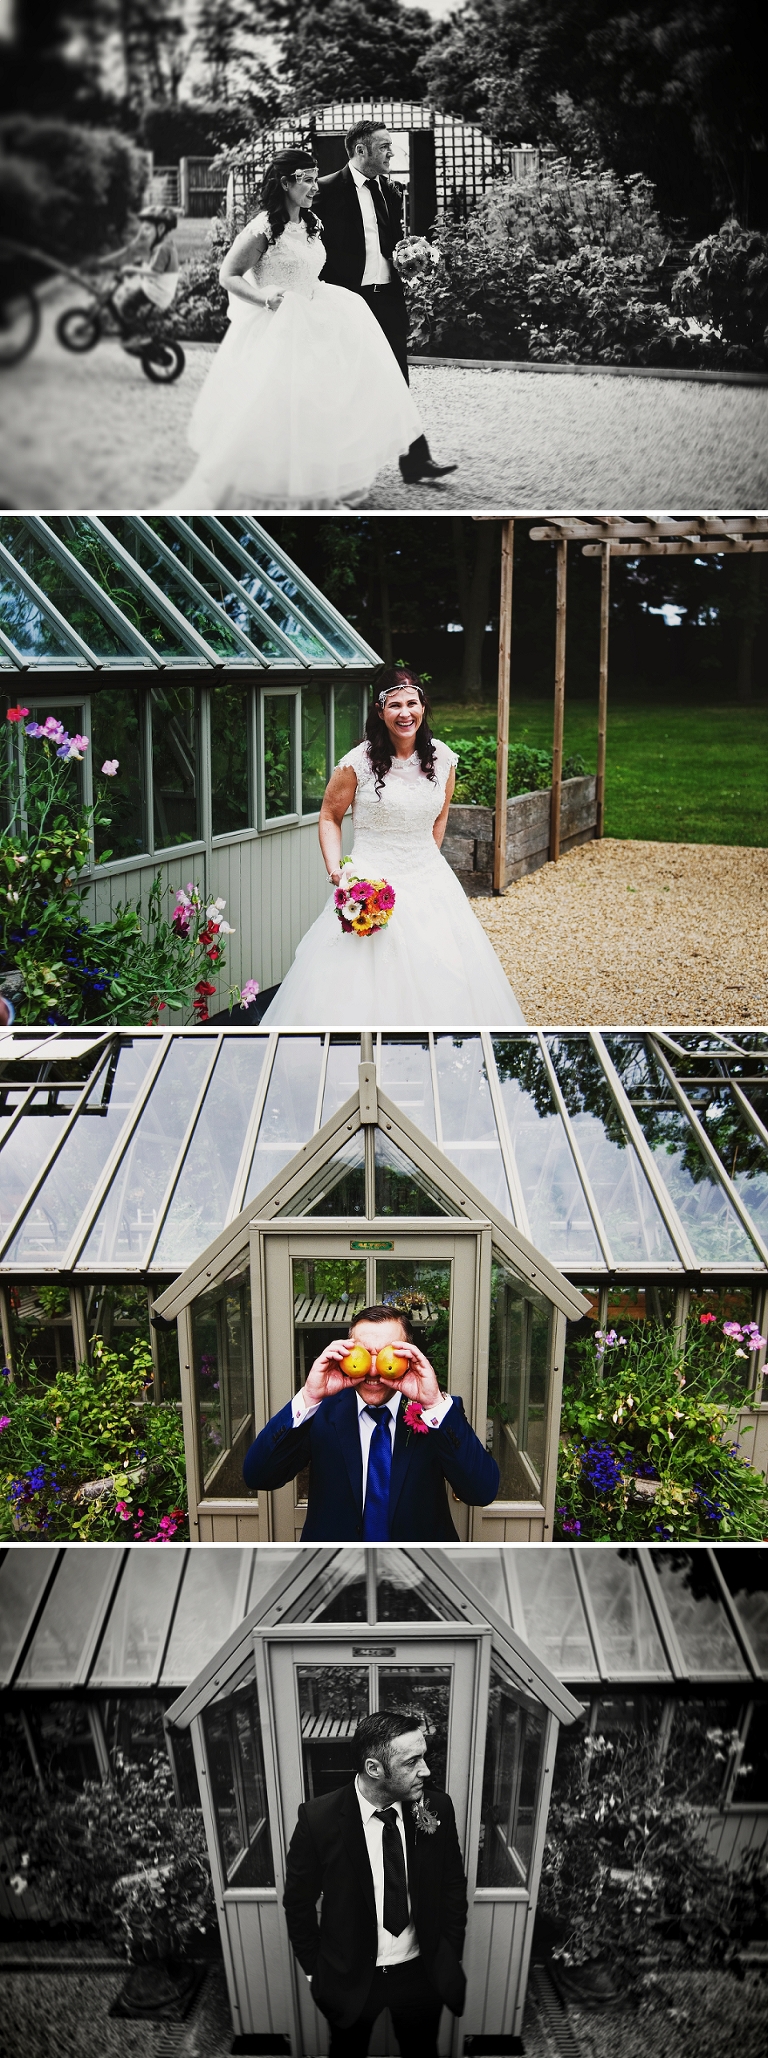 Bride and groom in gardens at Ribby Hall wedding